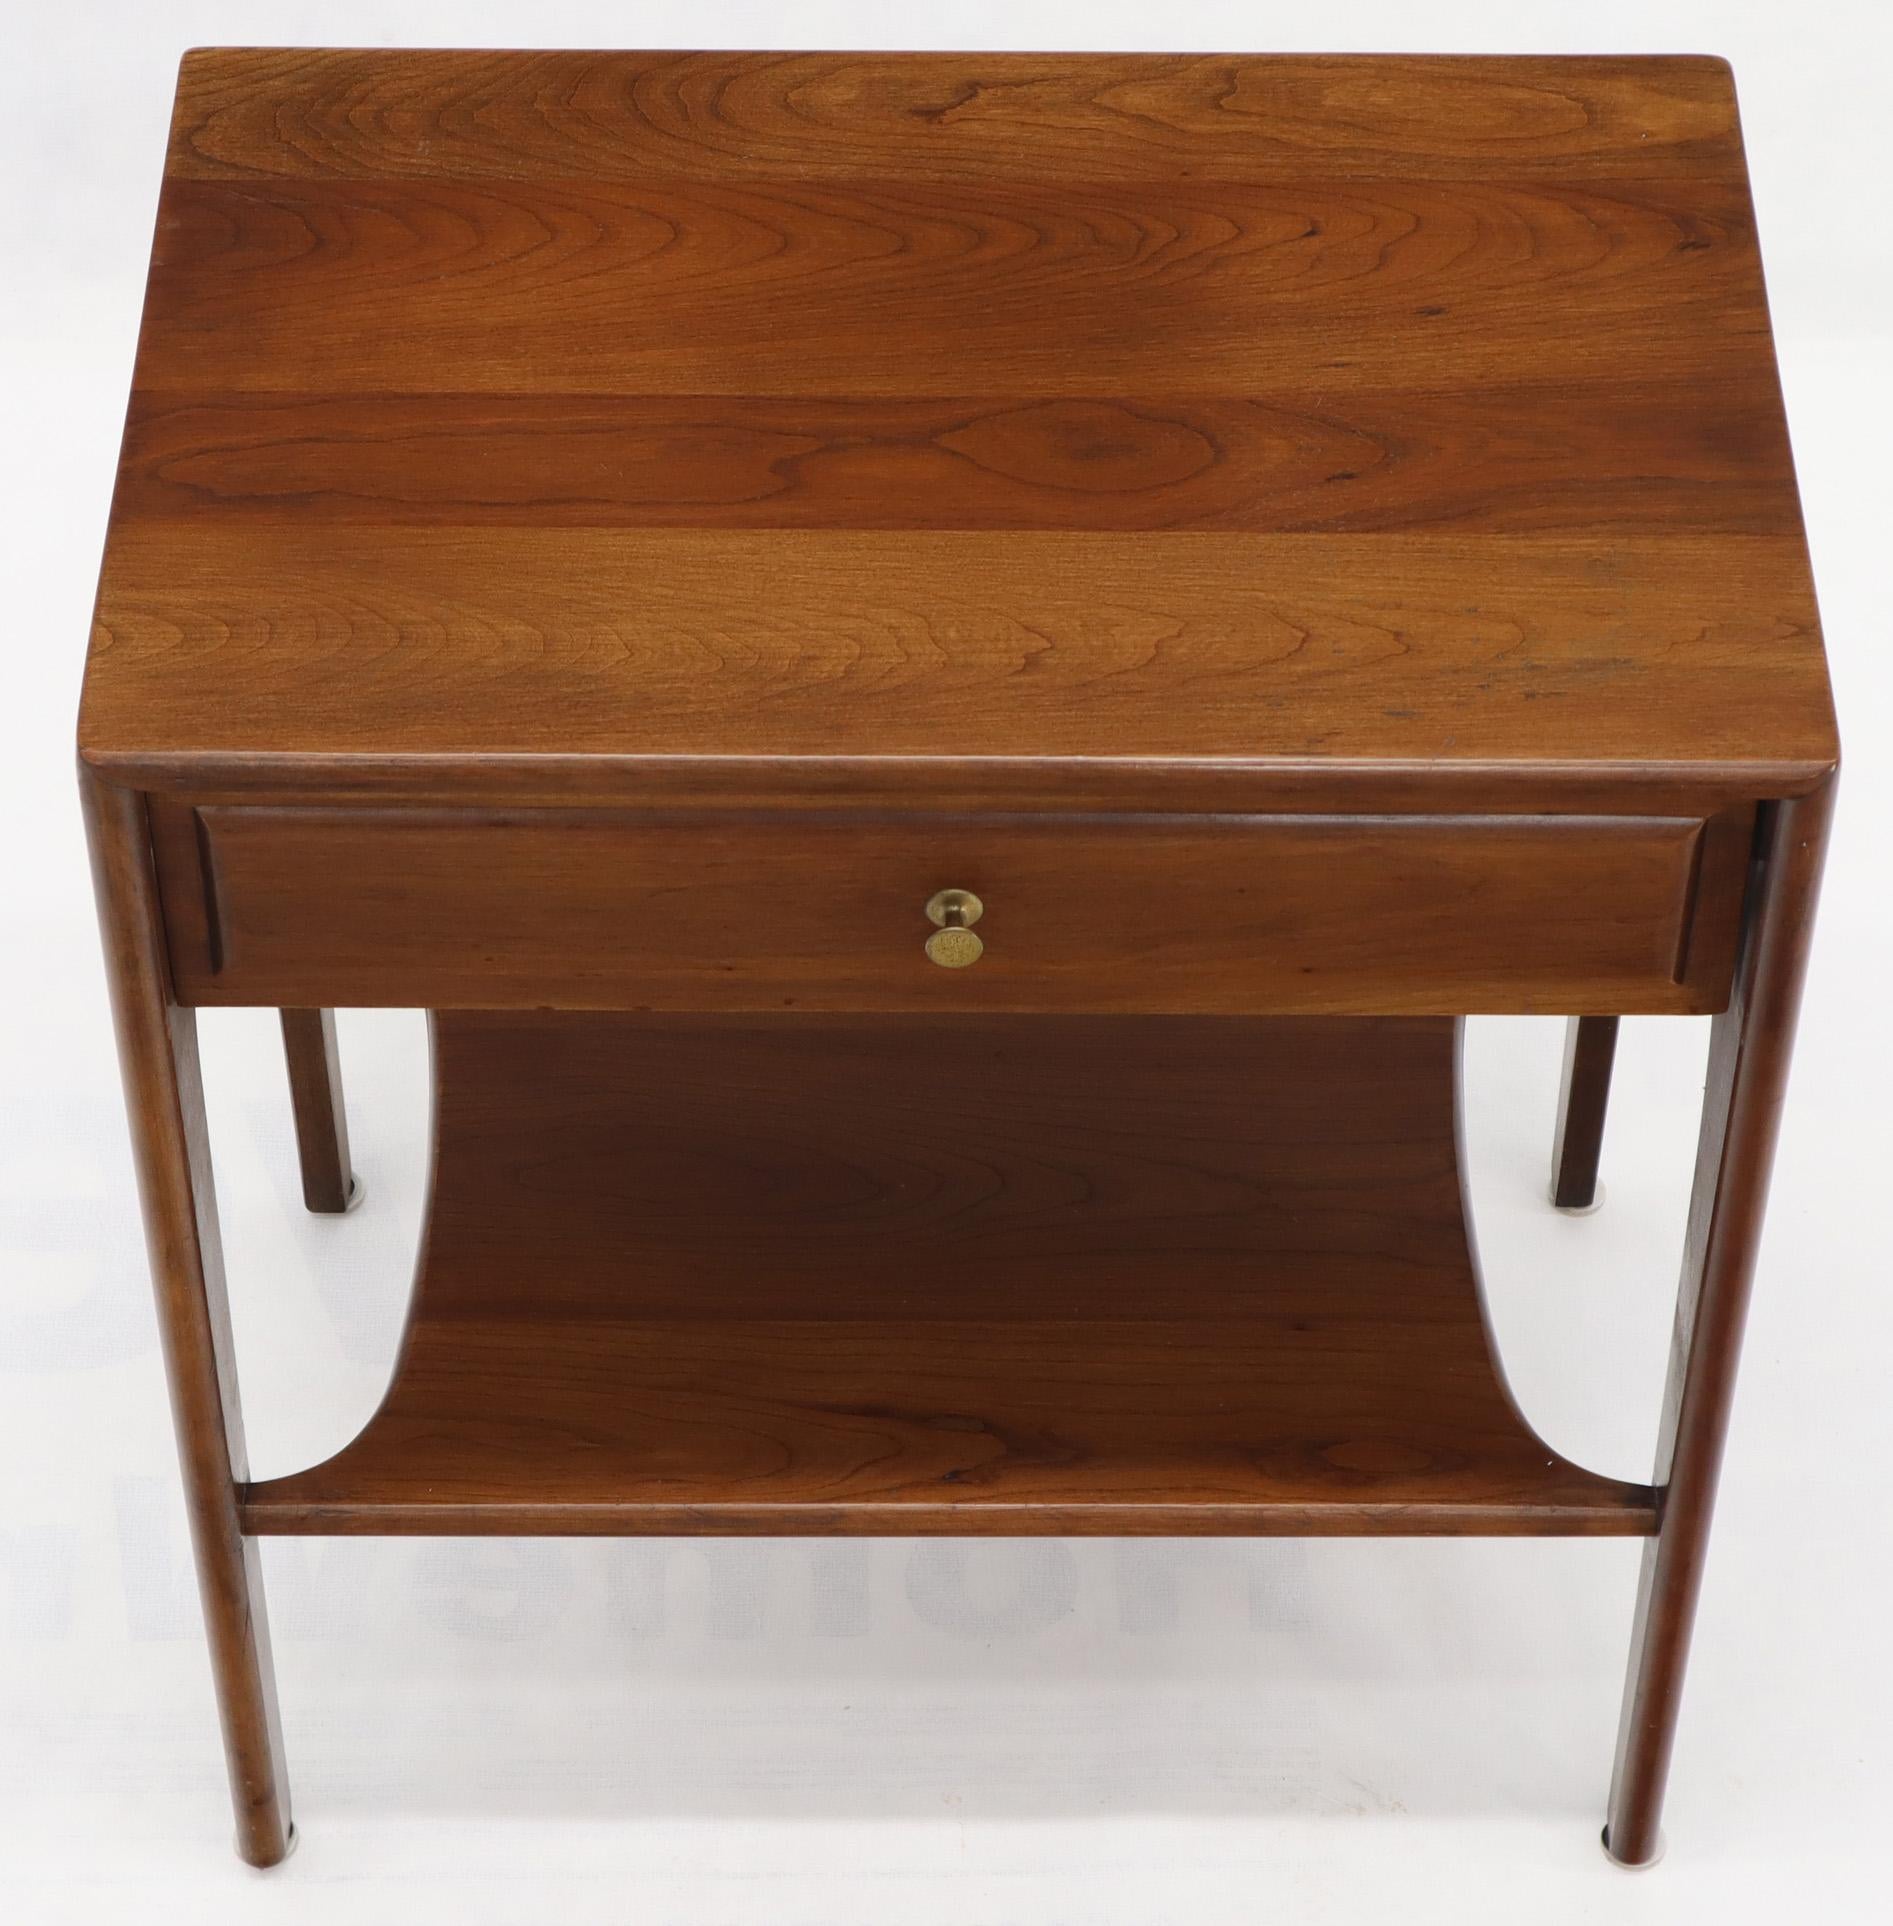 American Solid Cherry One Drawer End Table Nightstand Mid-Century Modern